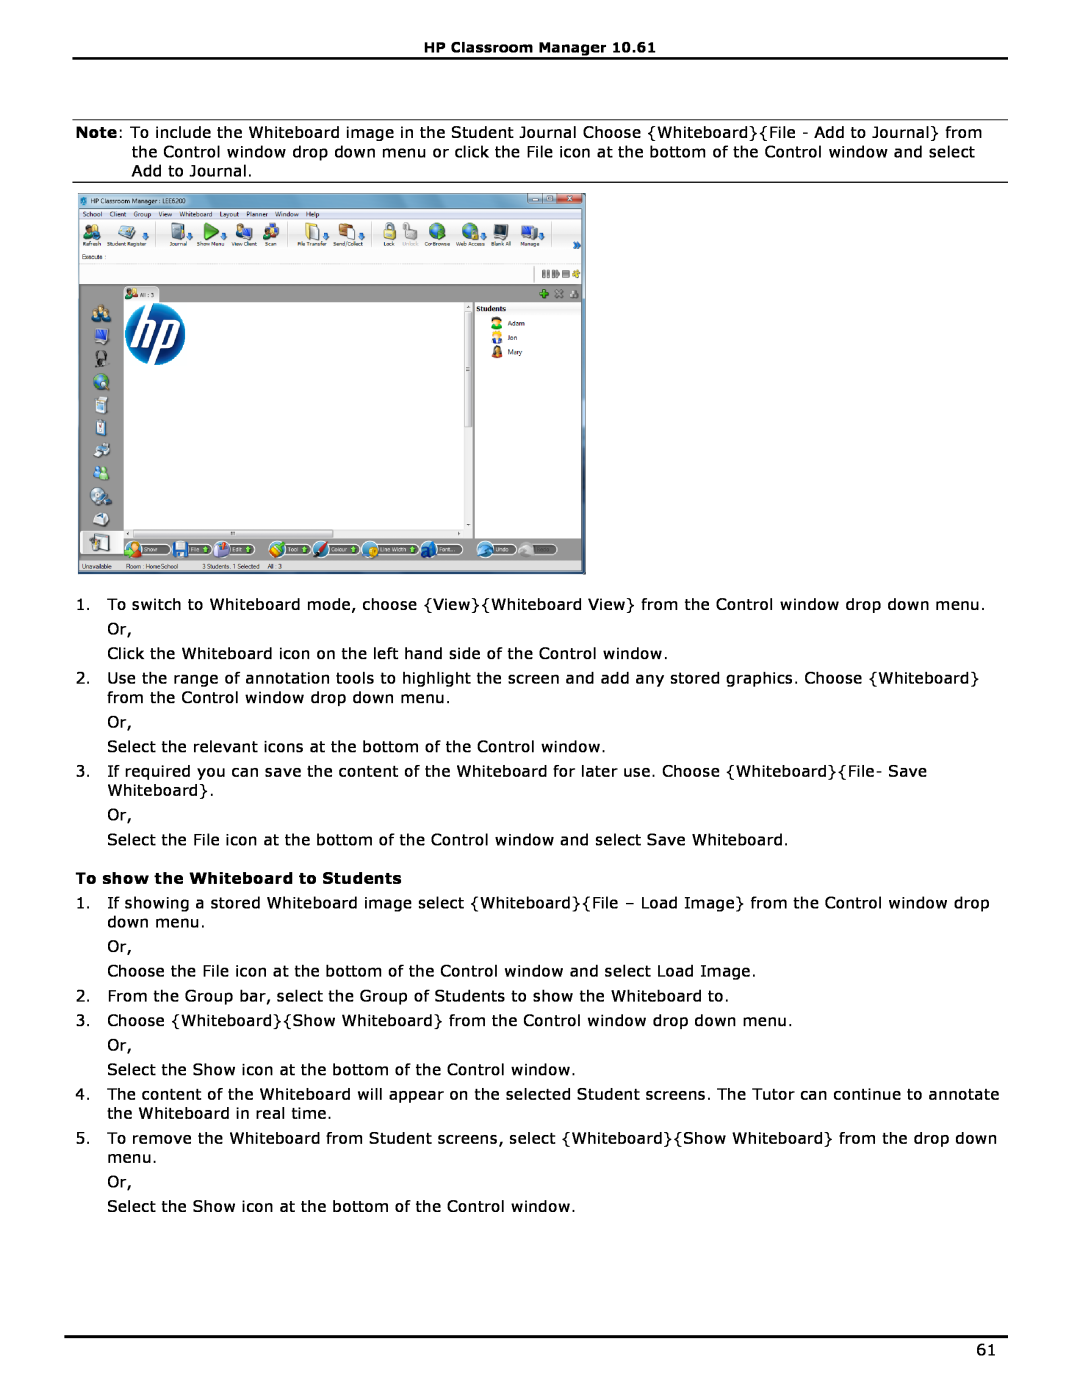 HP Classroom Manager manual To show the Whiteboard to Students 